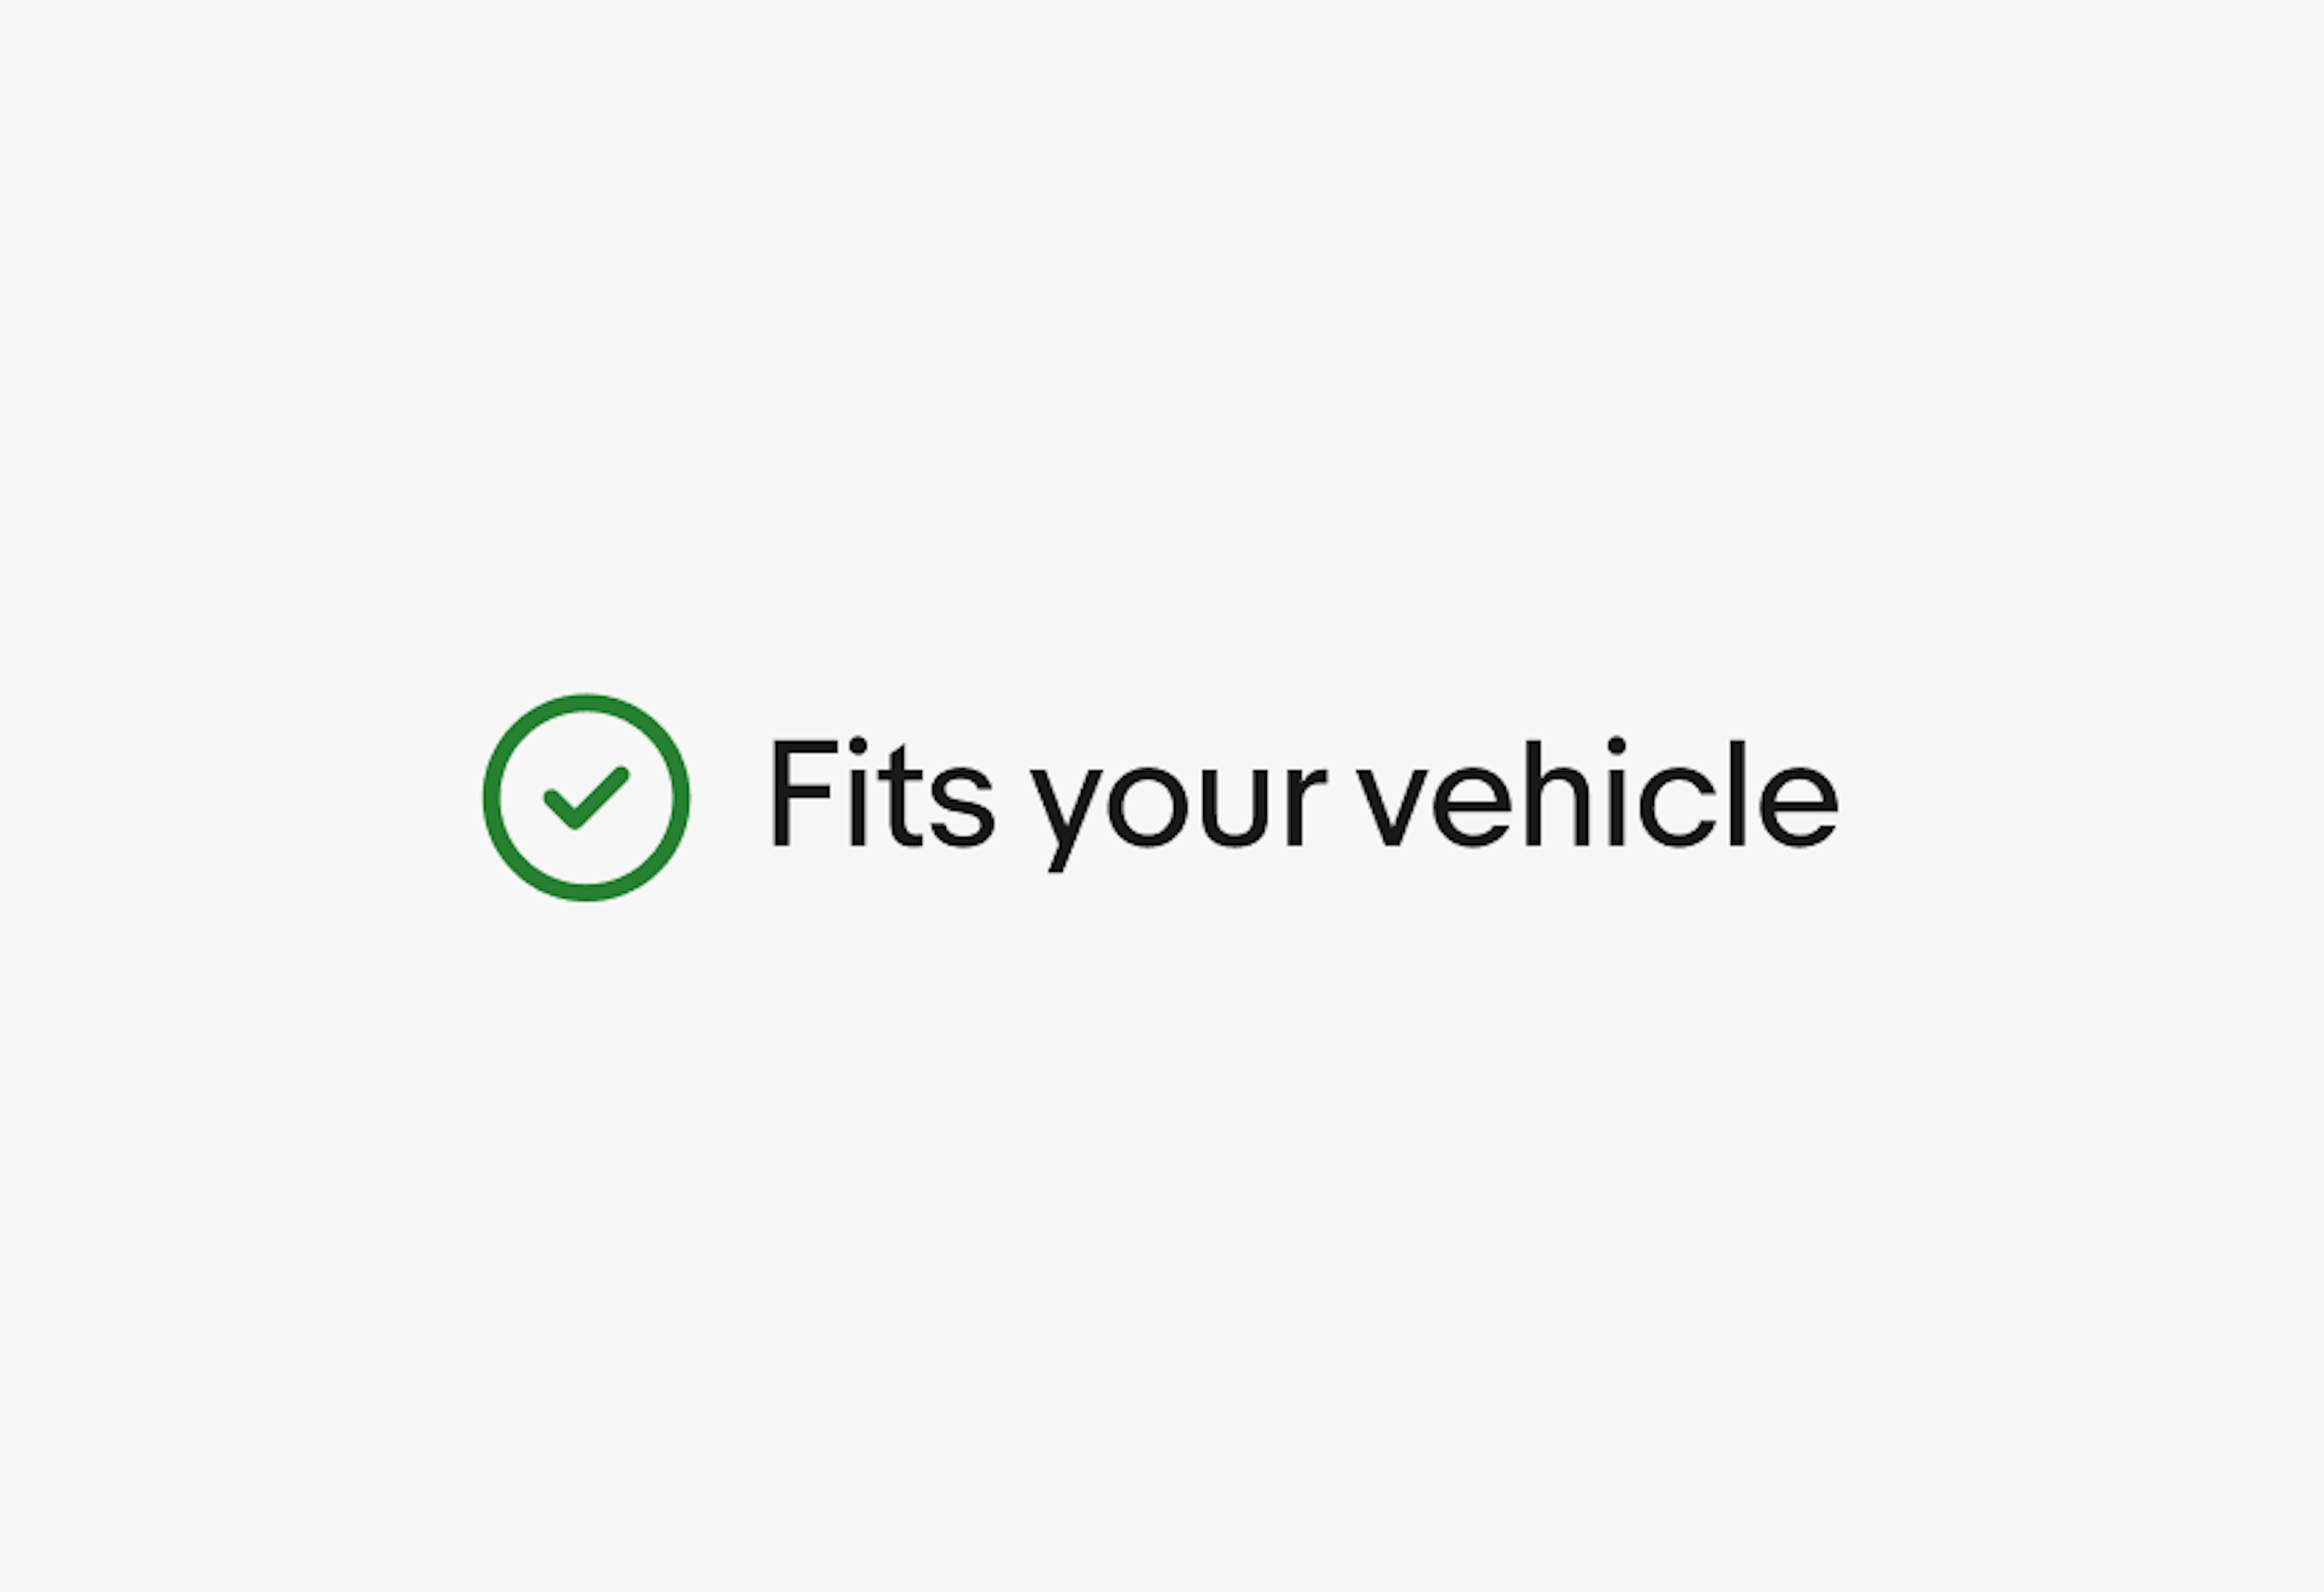 A green checkmark icon with a stroke and no fill next to the text “Fits your vehicle.